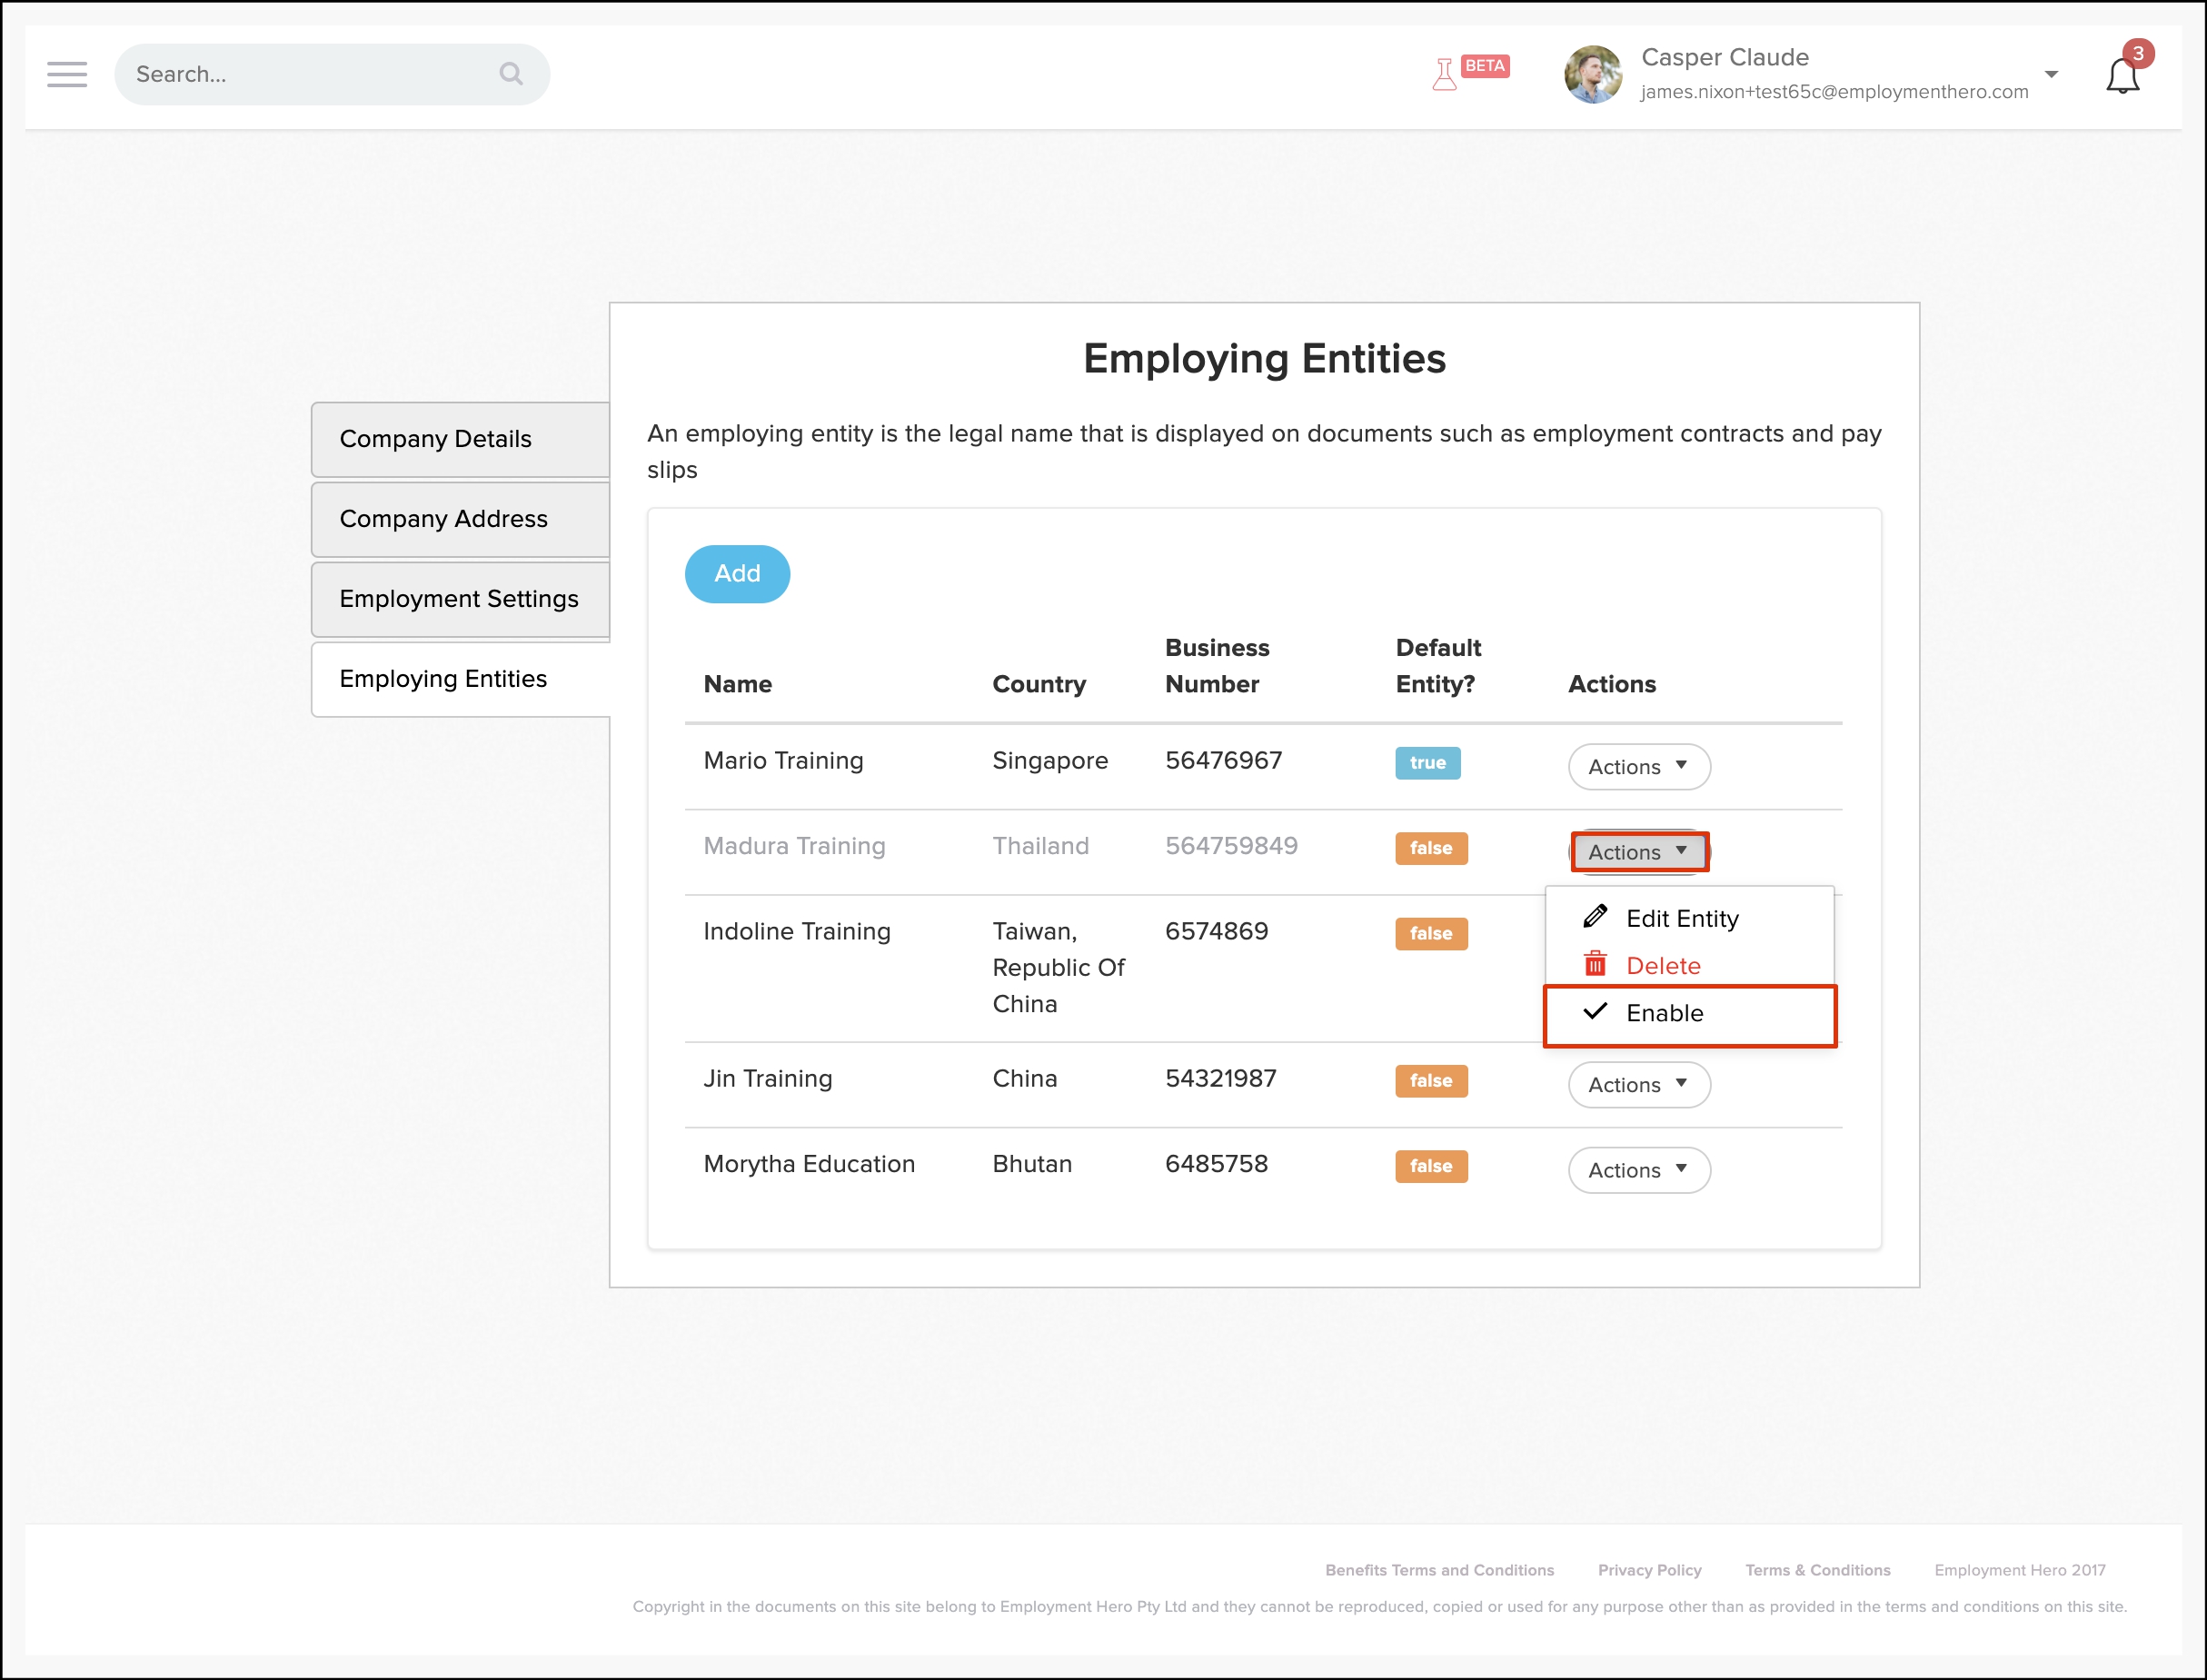 screenshot of the employing entities page. to the left of the screen you have the options company details, company address, employment settings, employing entities. employing entities is selected. on the screen reads employing entities. an employing entity is the legal name that is displayed on documents such as employment contracts and pay slips. below is an add button. below that is a table of company names vertically. horizontally they are sorted by name, country, business number, default entry status and action option. the action button for the first company entry is highlighted in red giving the option to enable the entry